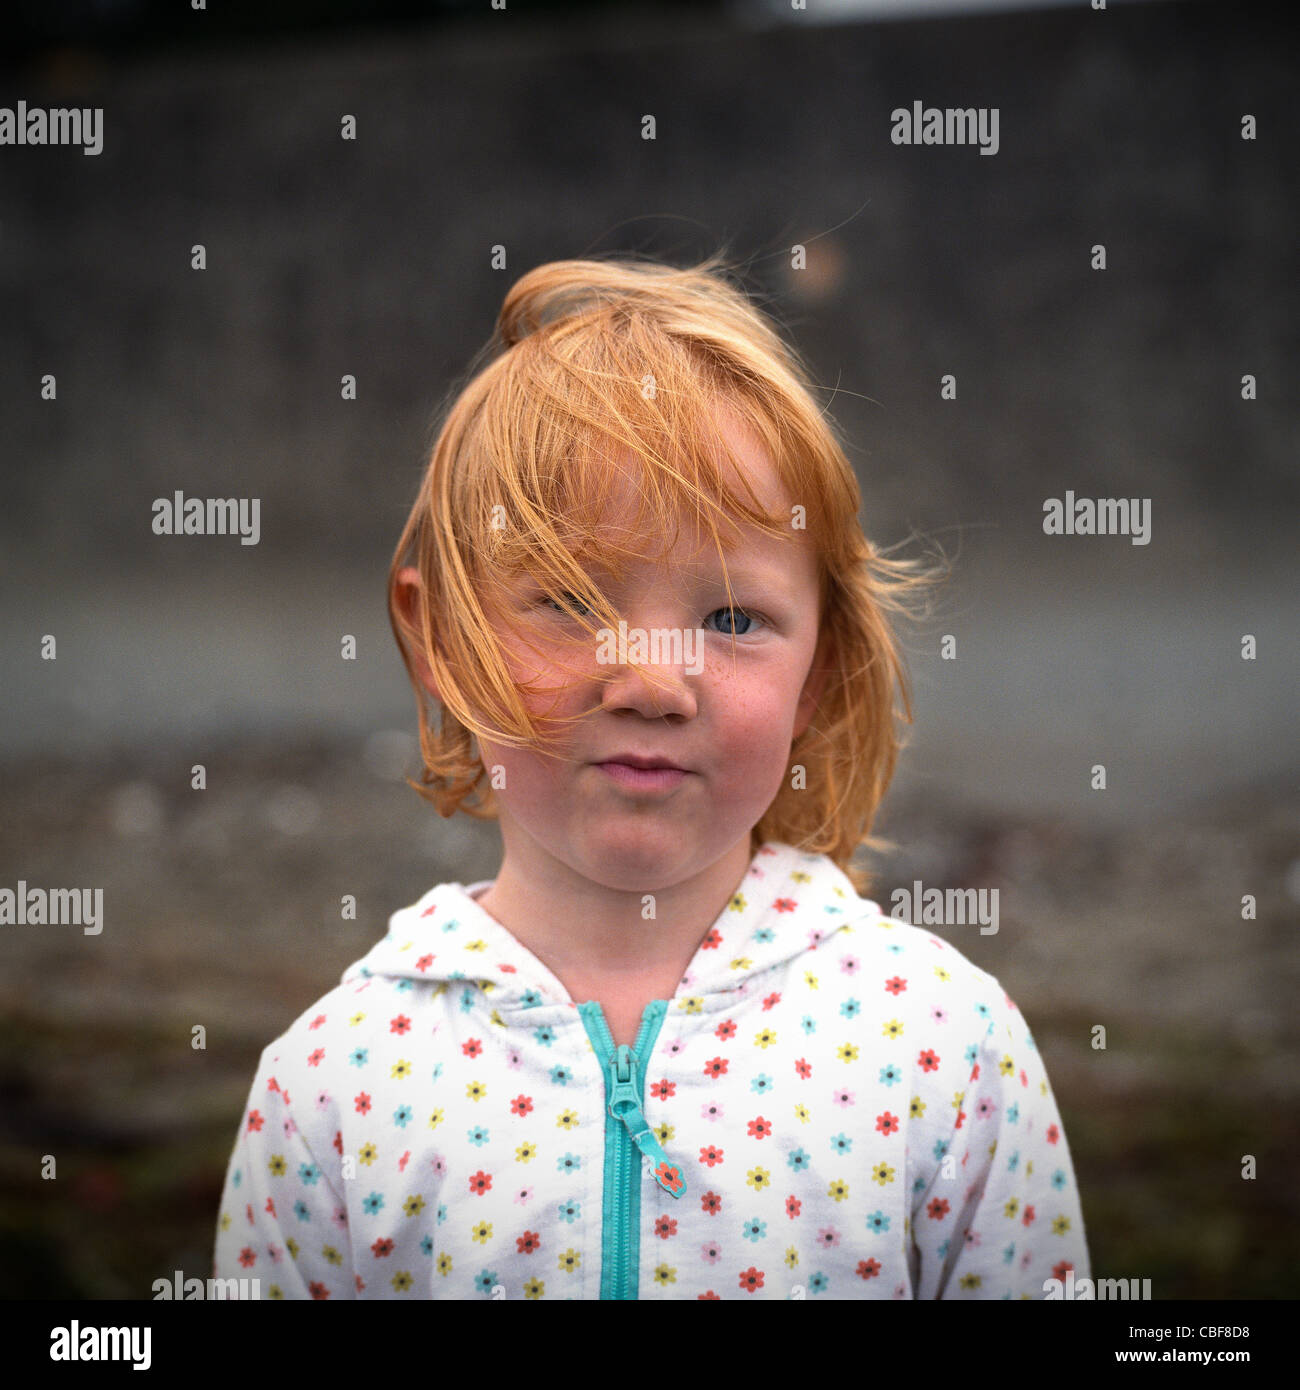 Little girl with red hair portrait Stock Photo